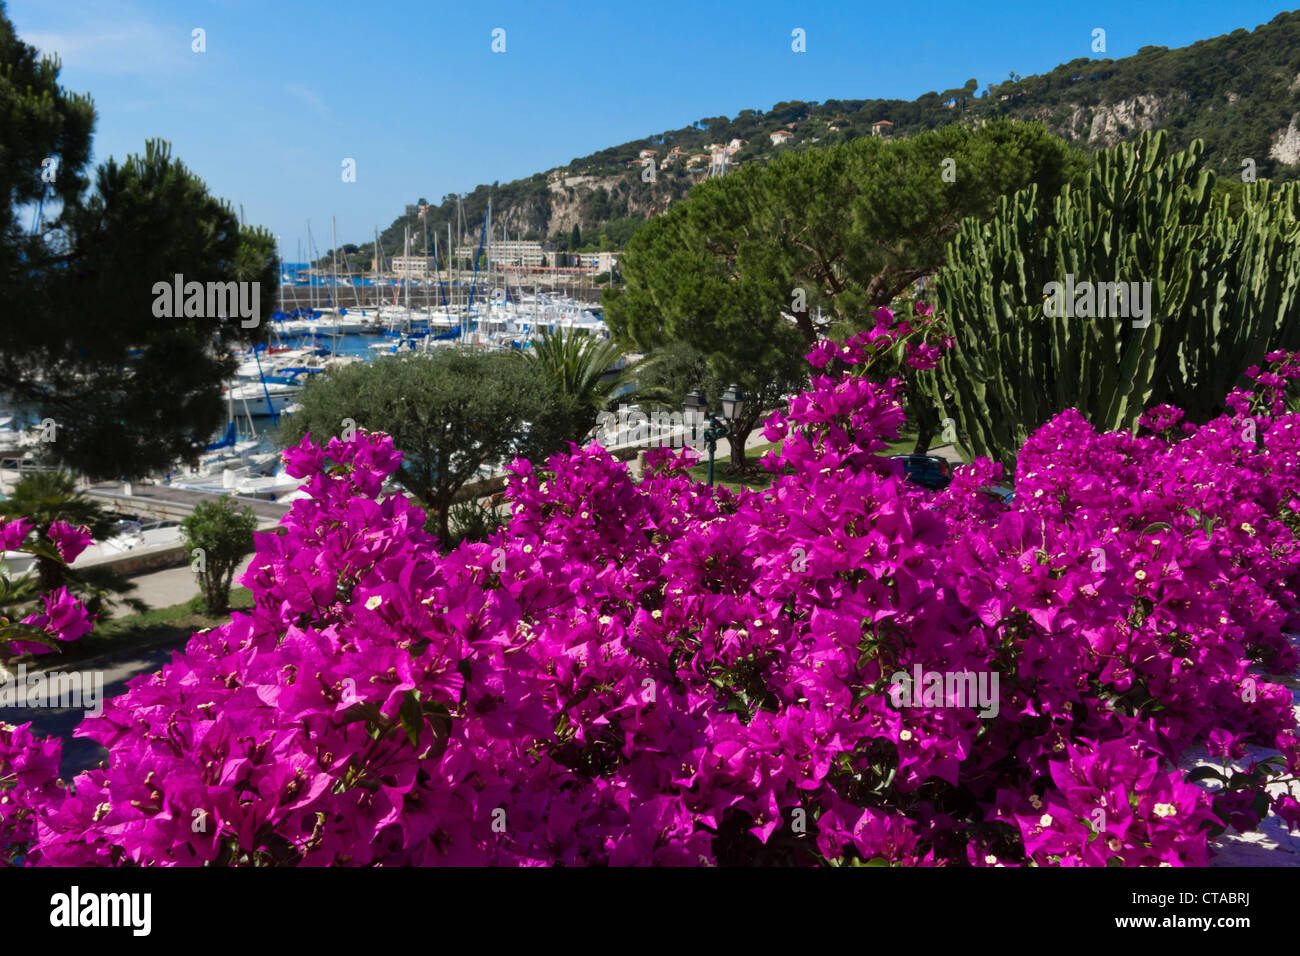 Flowers and cactuses near the marina, Villefranche sur mer, Cote d'Azur, Provence, France, Europe Stock Photo